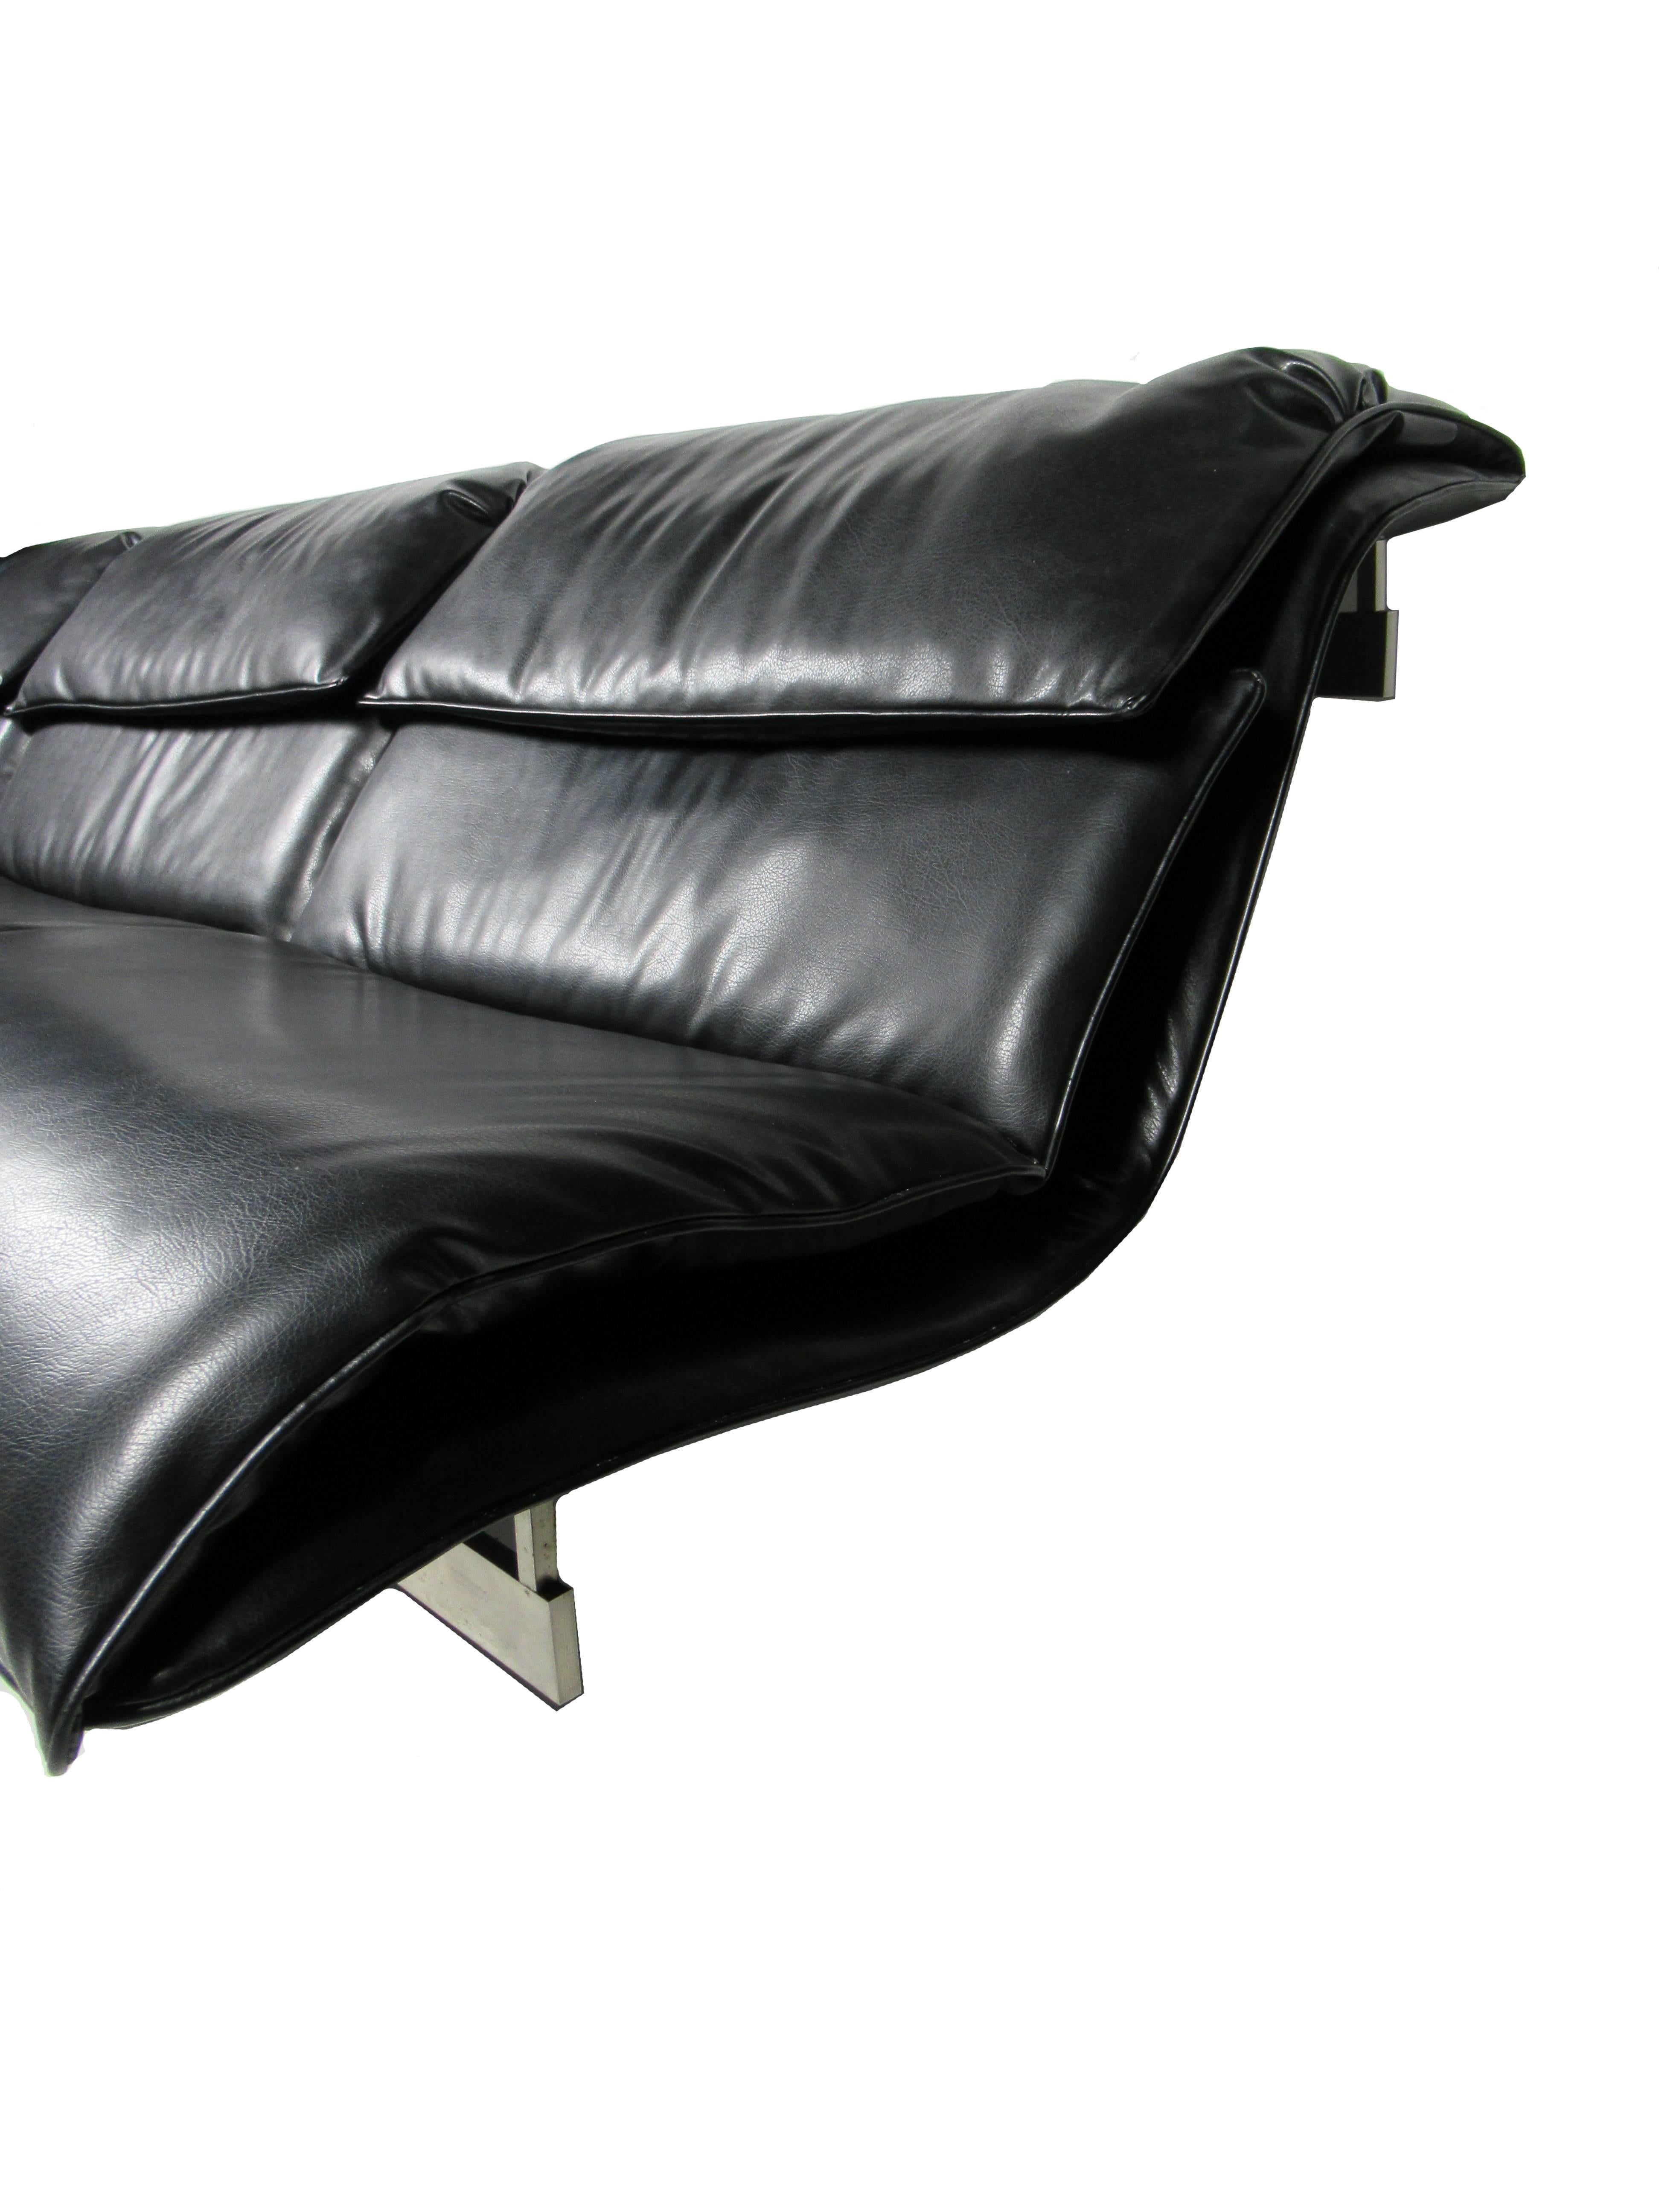 An Italian modern stainless steel and leather three-seat 